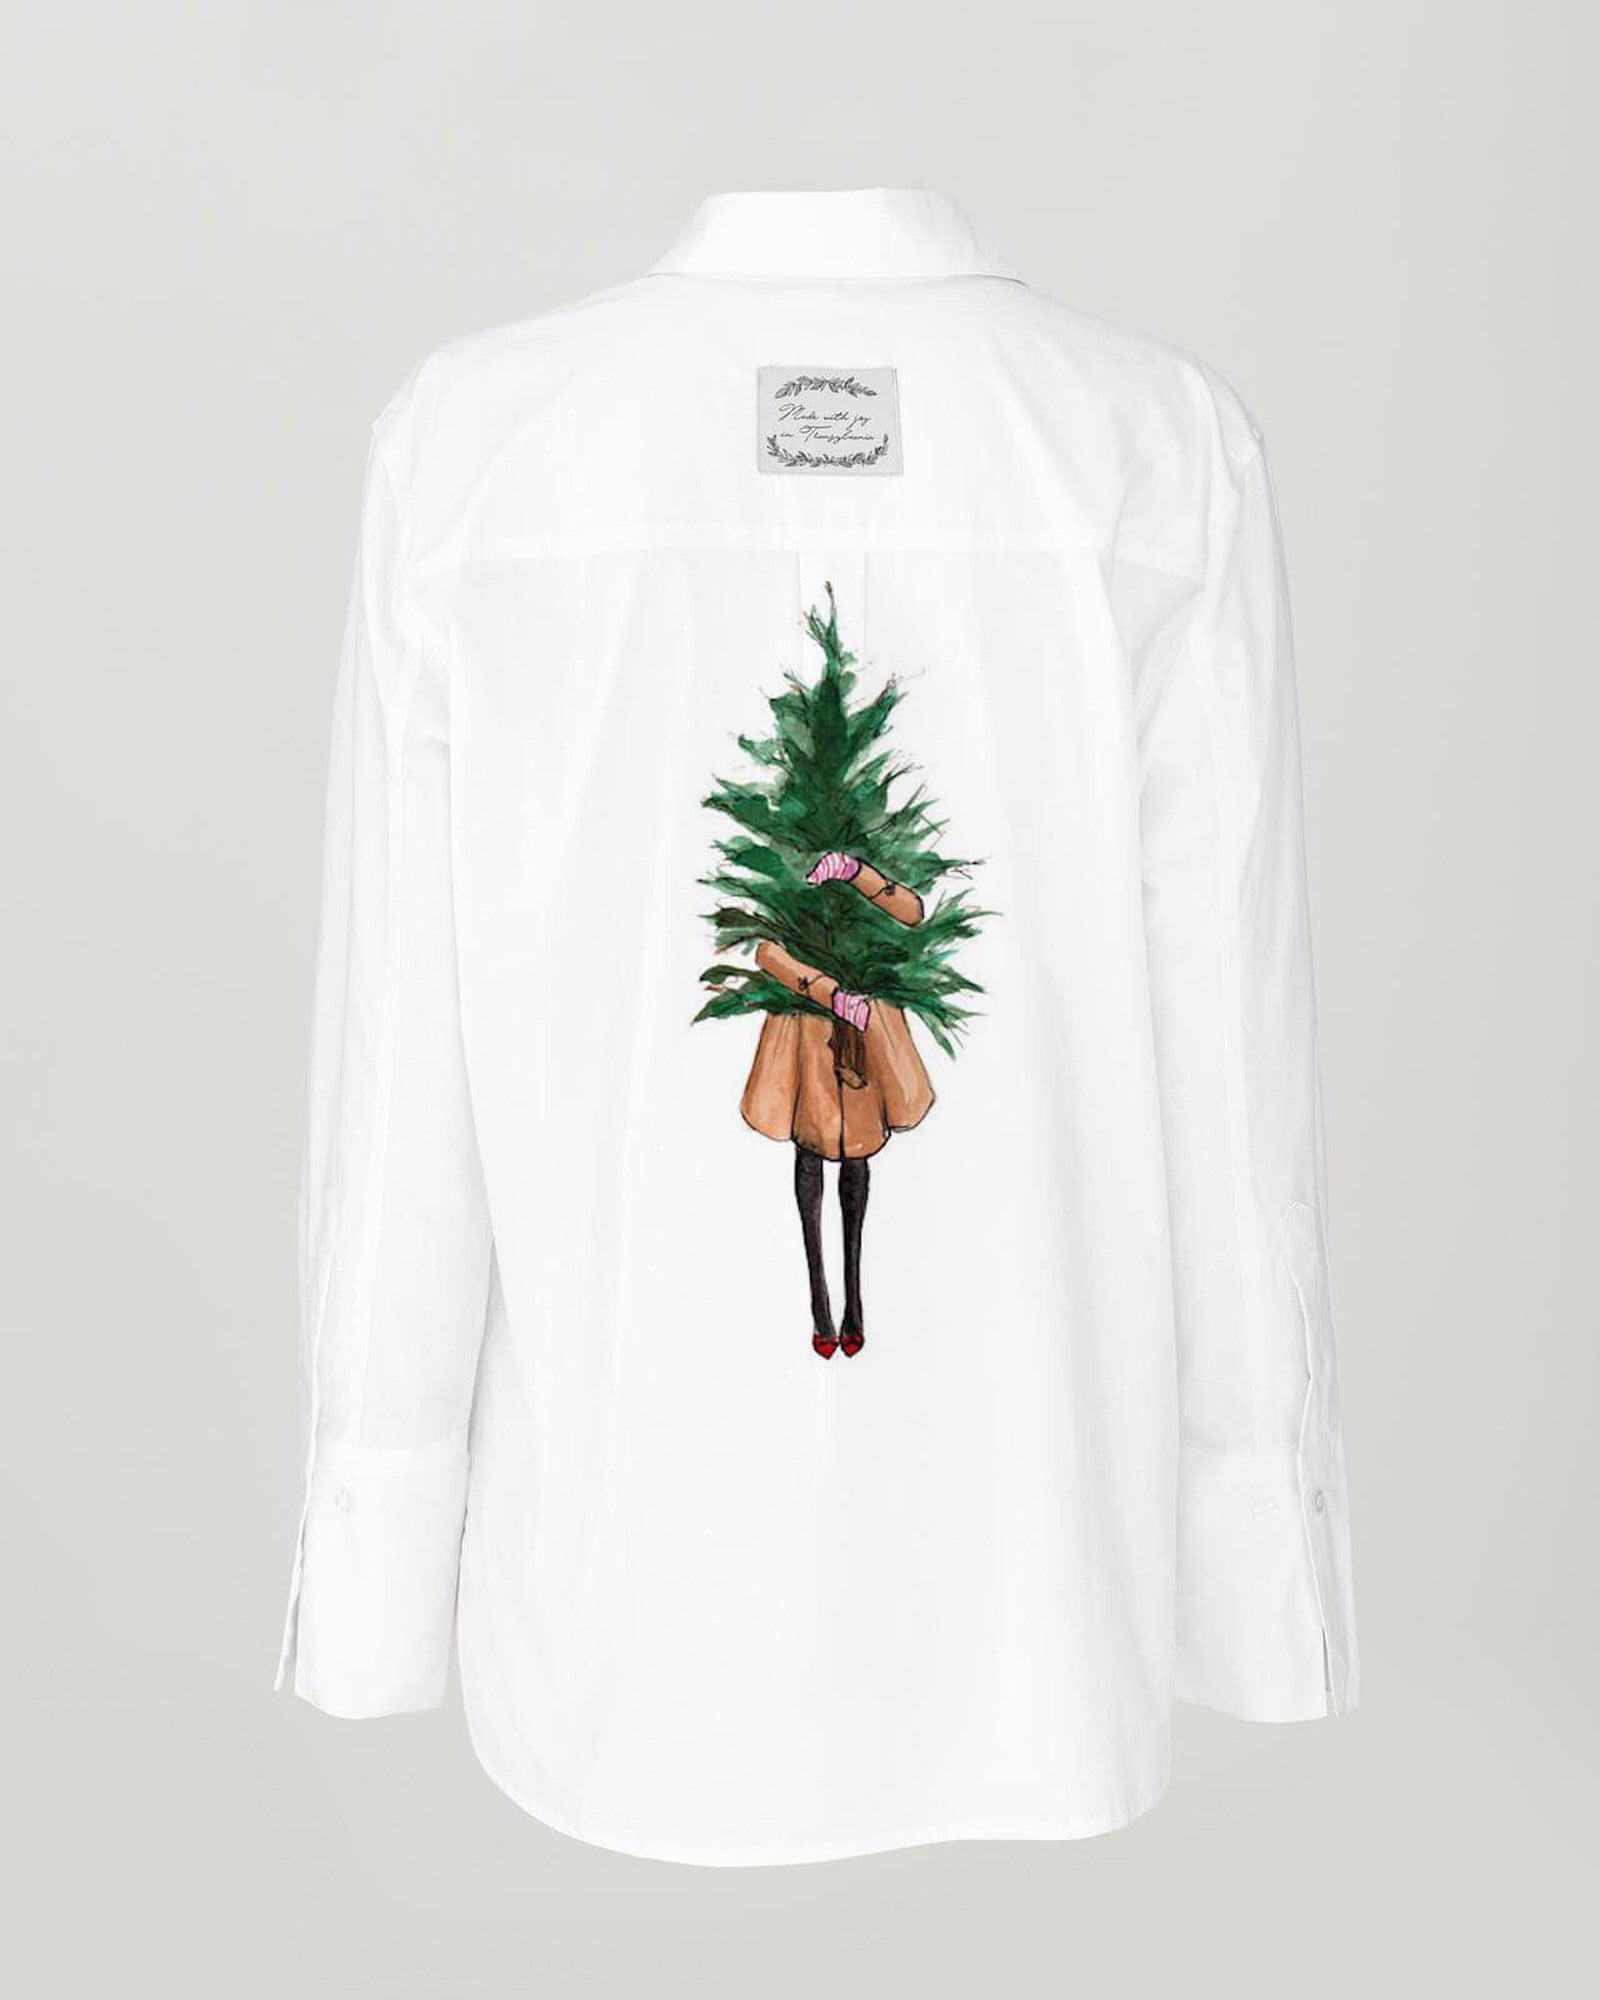 Crazy about Christmas hand painted shirt